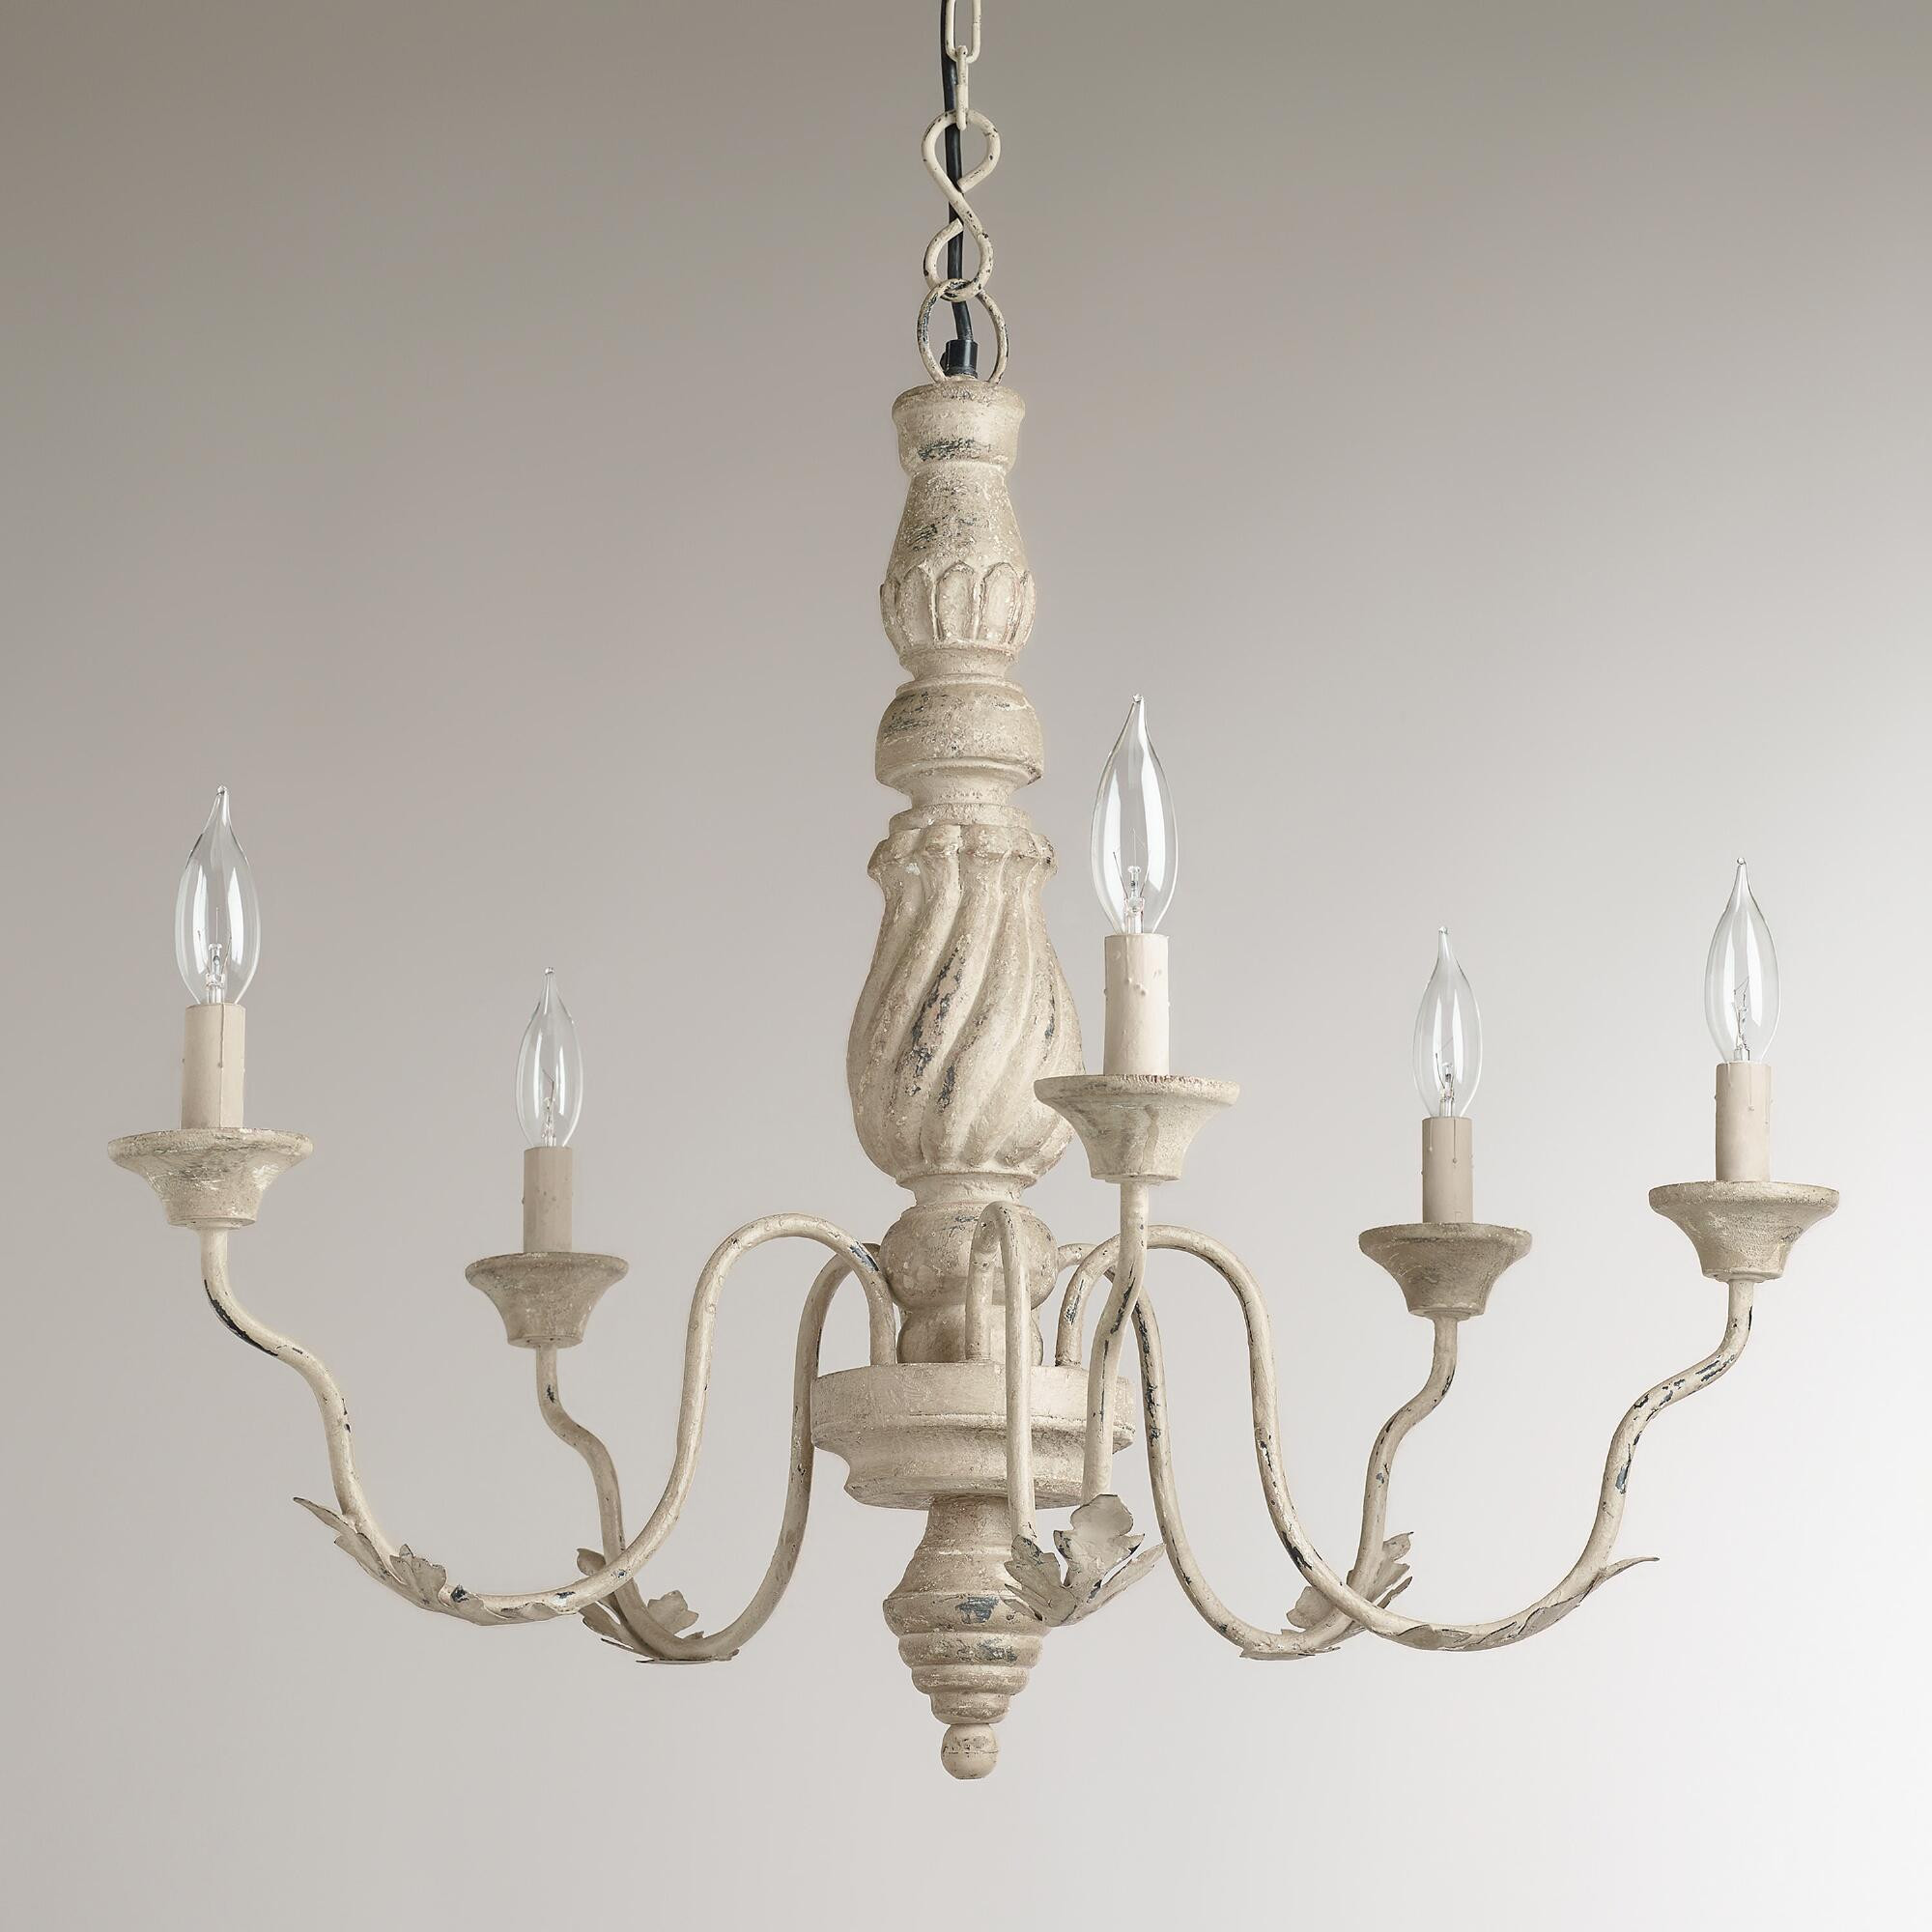 Best ideas about World Market Lighting
. Save or Pin Gray Vintage Chandelier Now.